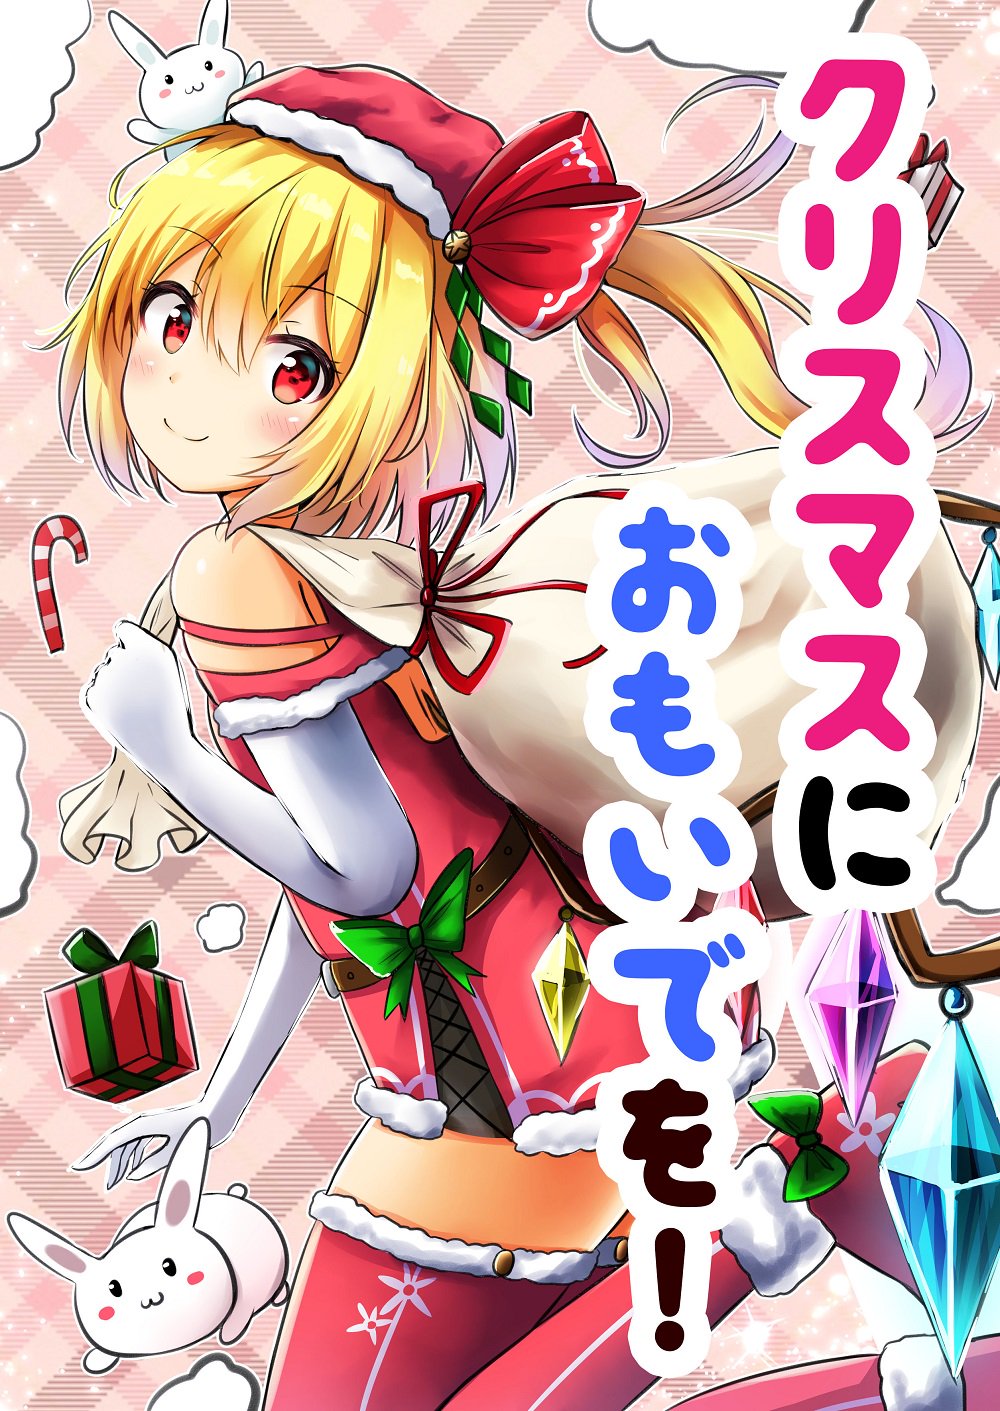 1girl :3 alternate_costume bare_shoulders blonde_hair blush bow box candy candy_cane christmas elbow_gloves flandre_scarlet food gift gift_box gloves green_bow hat hat_bow highres holding holding_sack looking_at_viewer rabbit red_bow red_eyes red_footwear red_legwear red_ribbon renka_(cloudsaikou) ribbon santa_costume santa_hat shoe_bow shoes side_ponytail smile thigh-highs touhou translation_request white_gloves wings